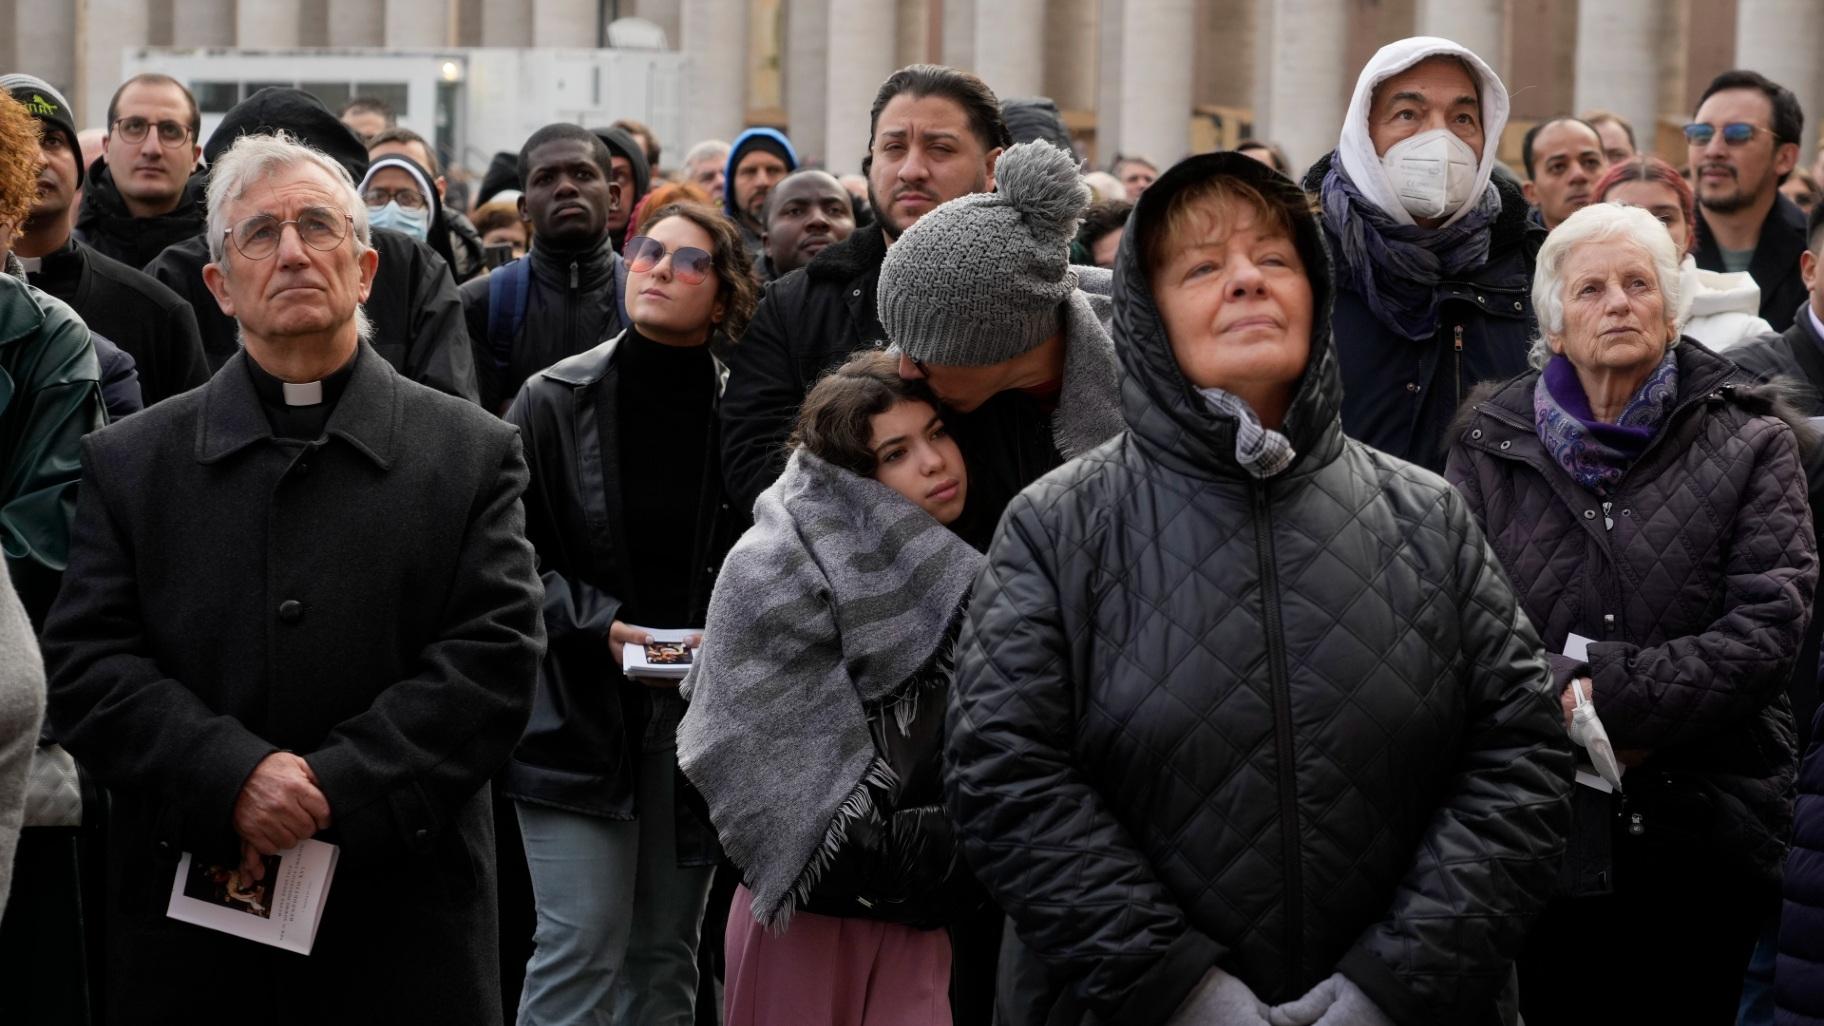 Faithful attend the funeral mass for late Pope Emeritus Benedict XVI in St. Peter's Square at the Vatican, Thursday, Jan. 5, 2023. (AP Photo / Gregorio Borgia)